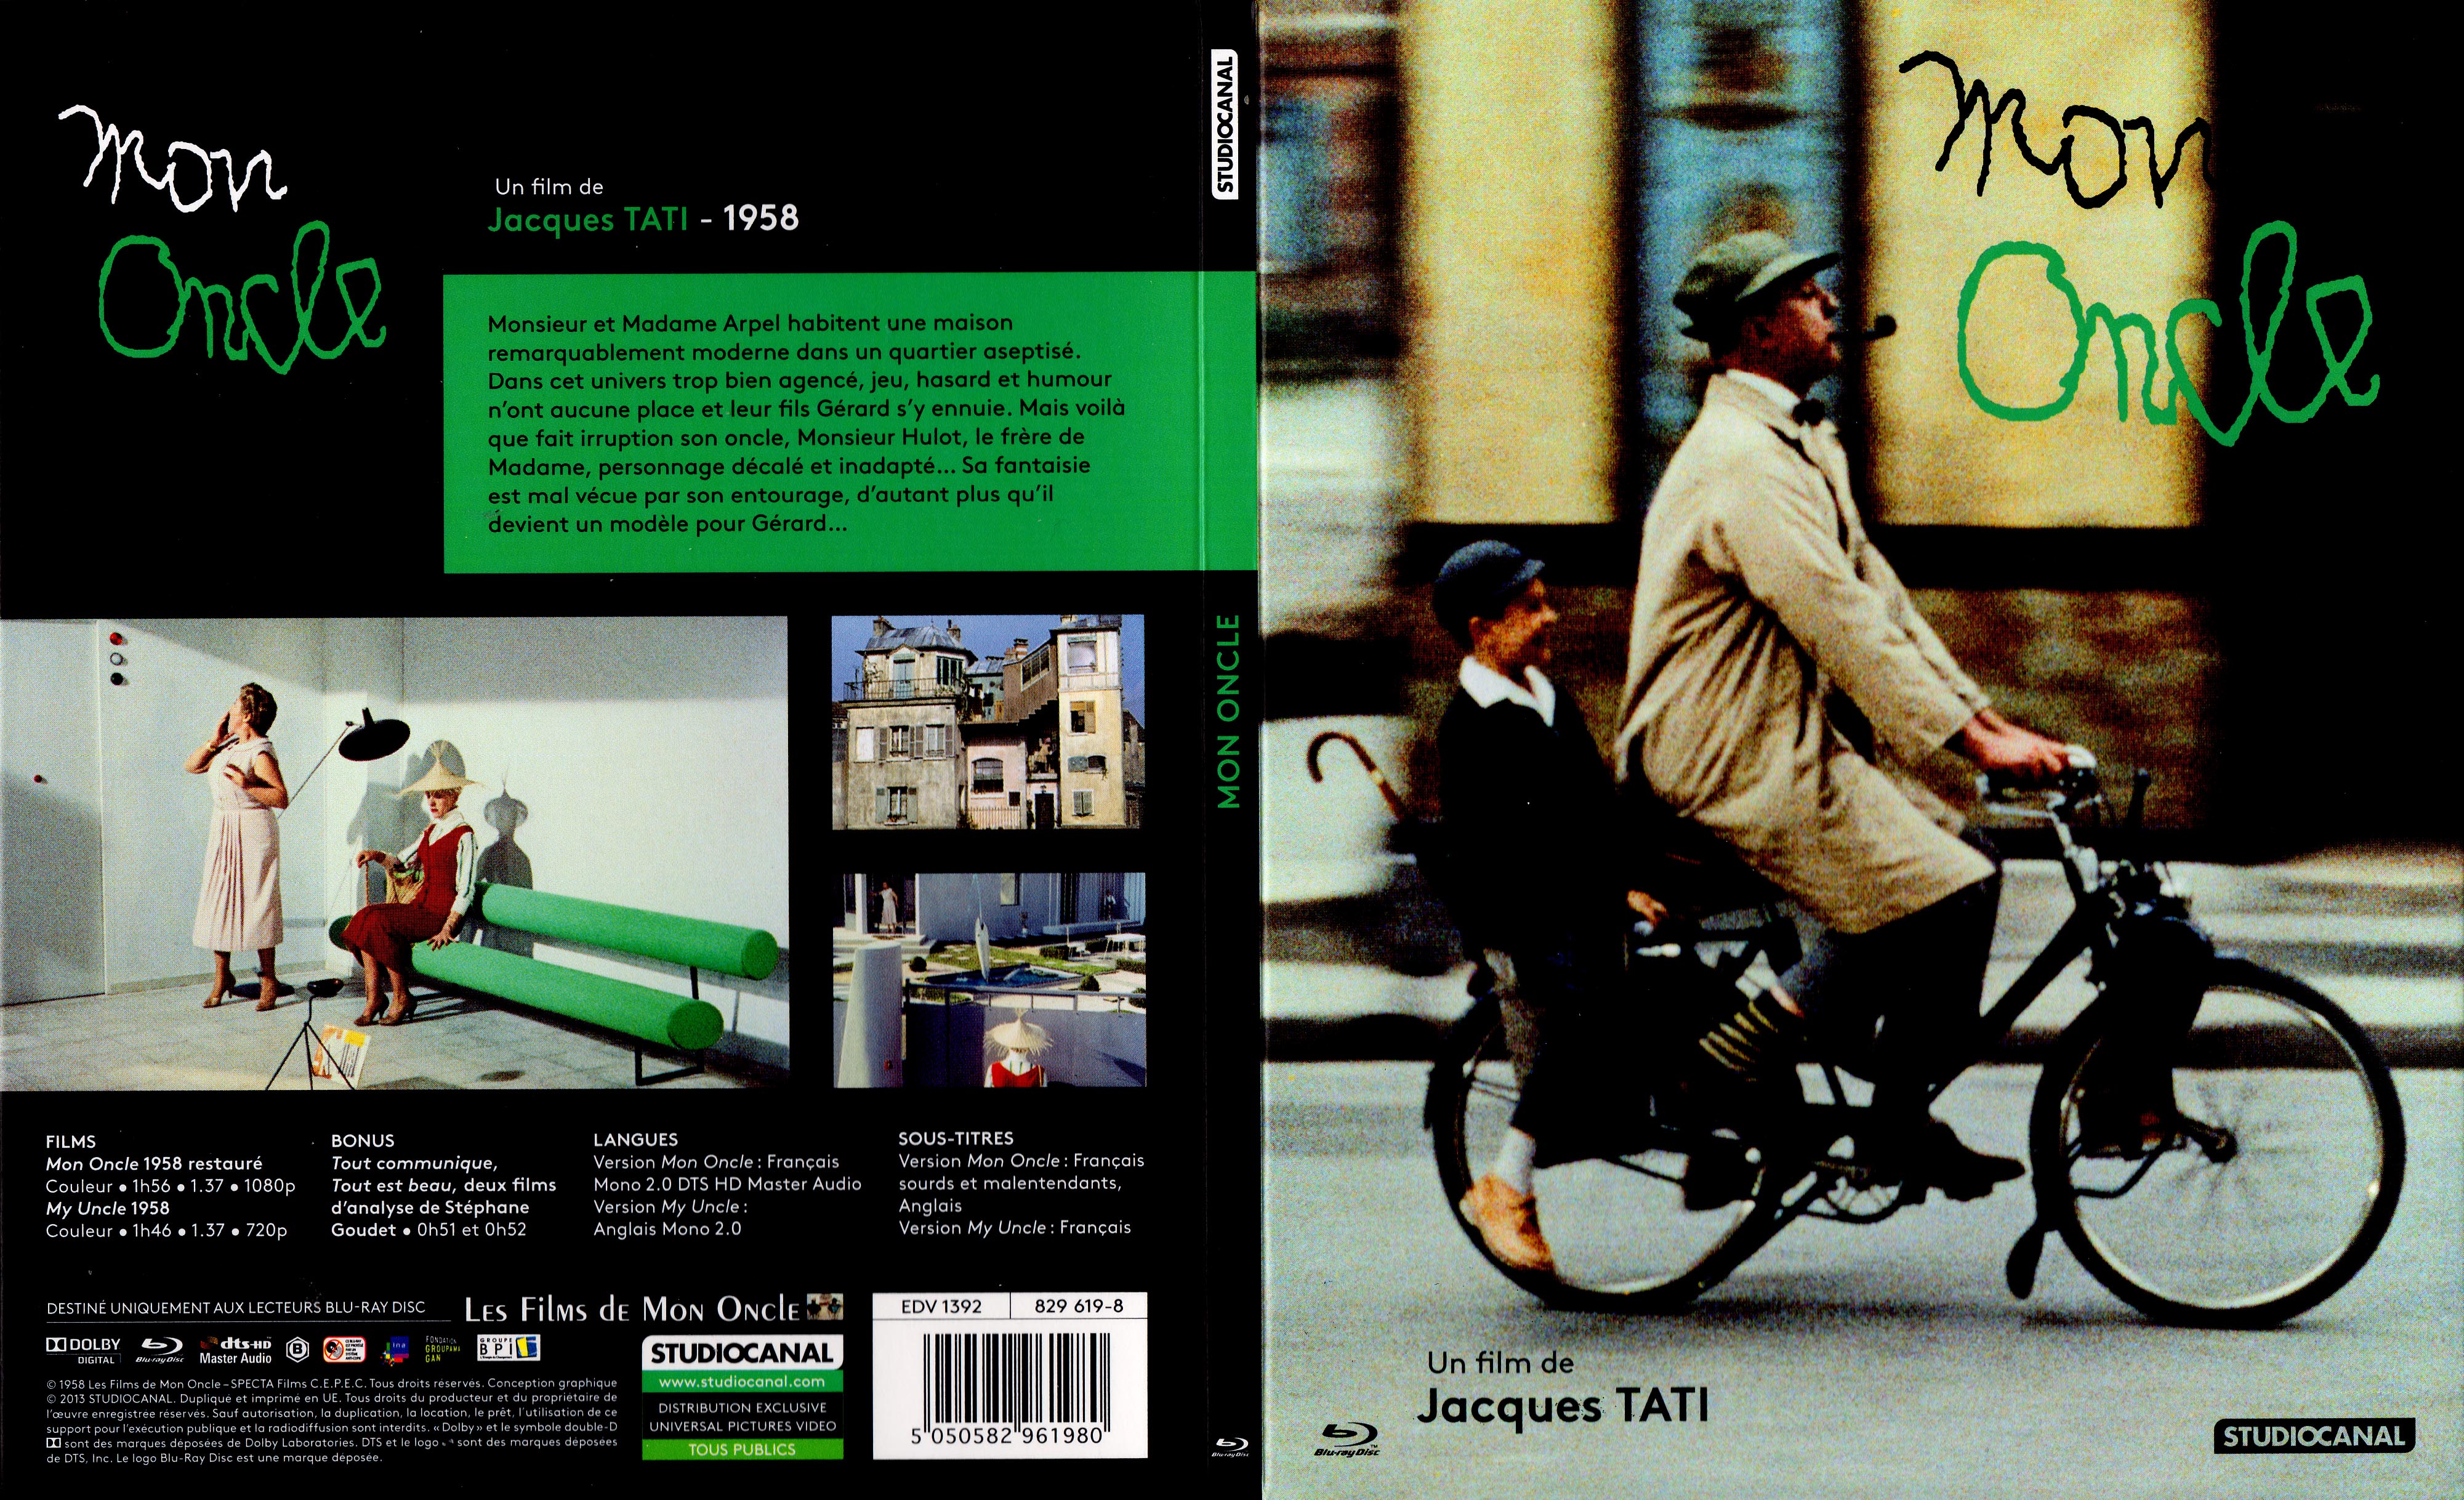 Jaquette DVD Mon oncle (BLU-RAY)